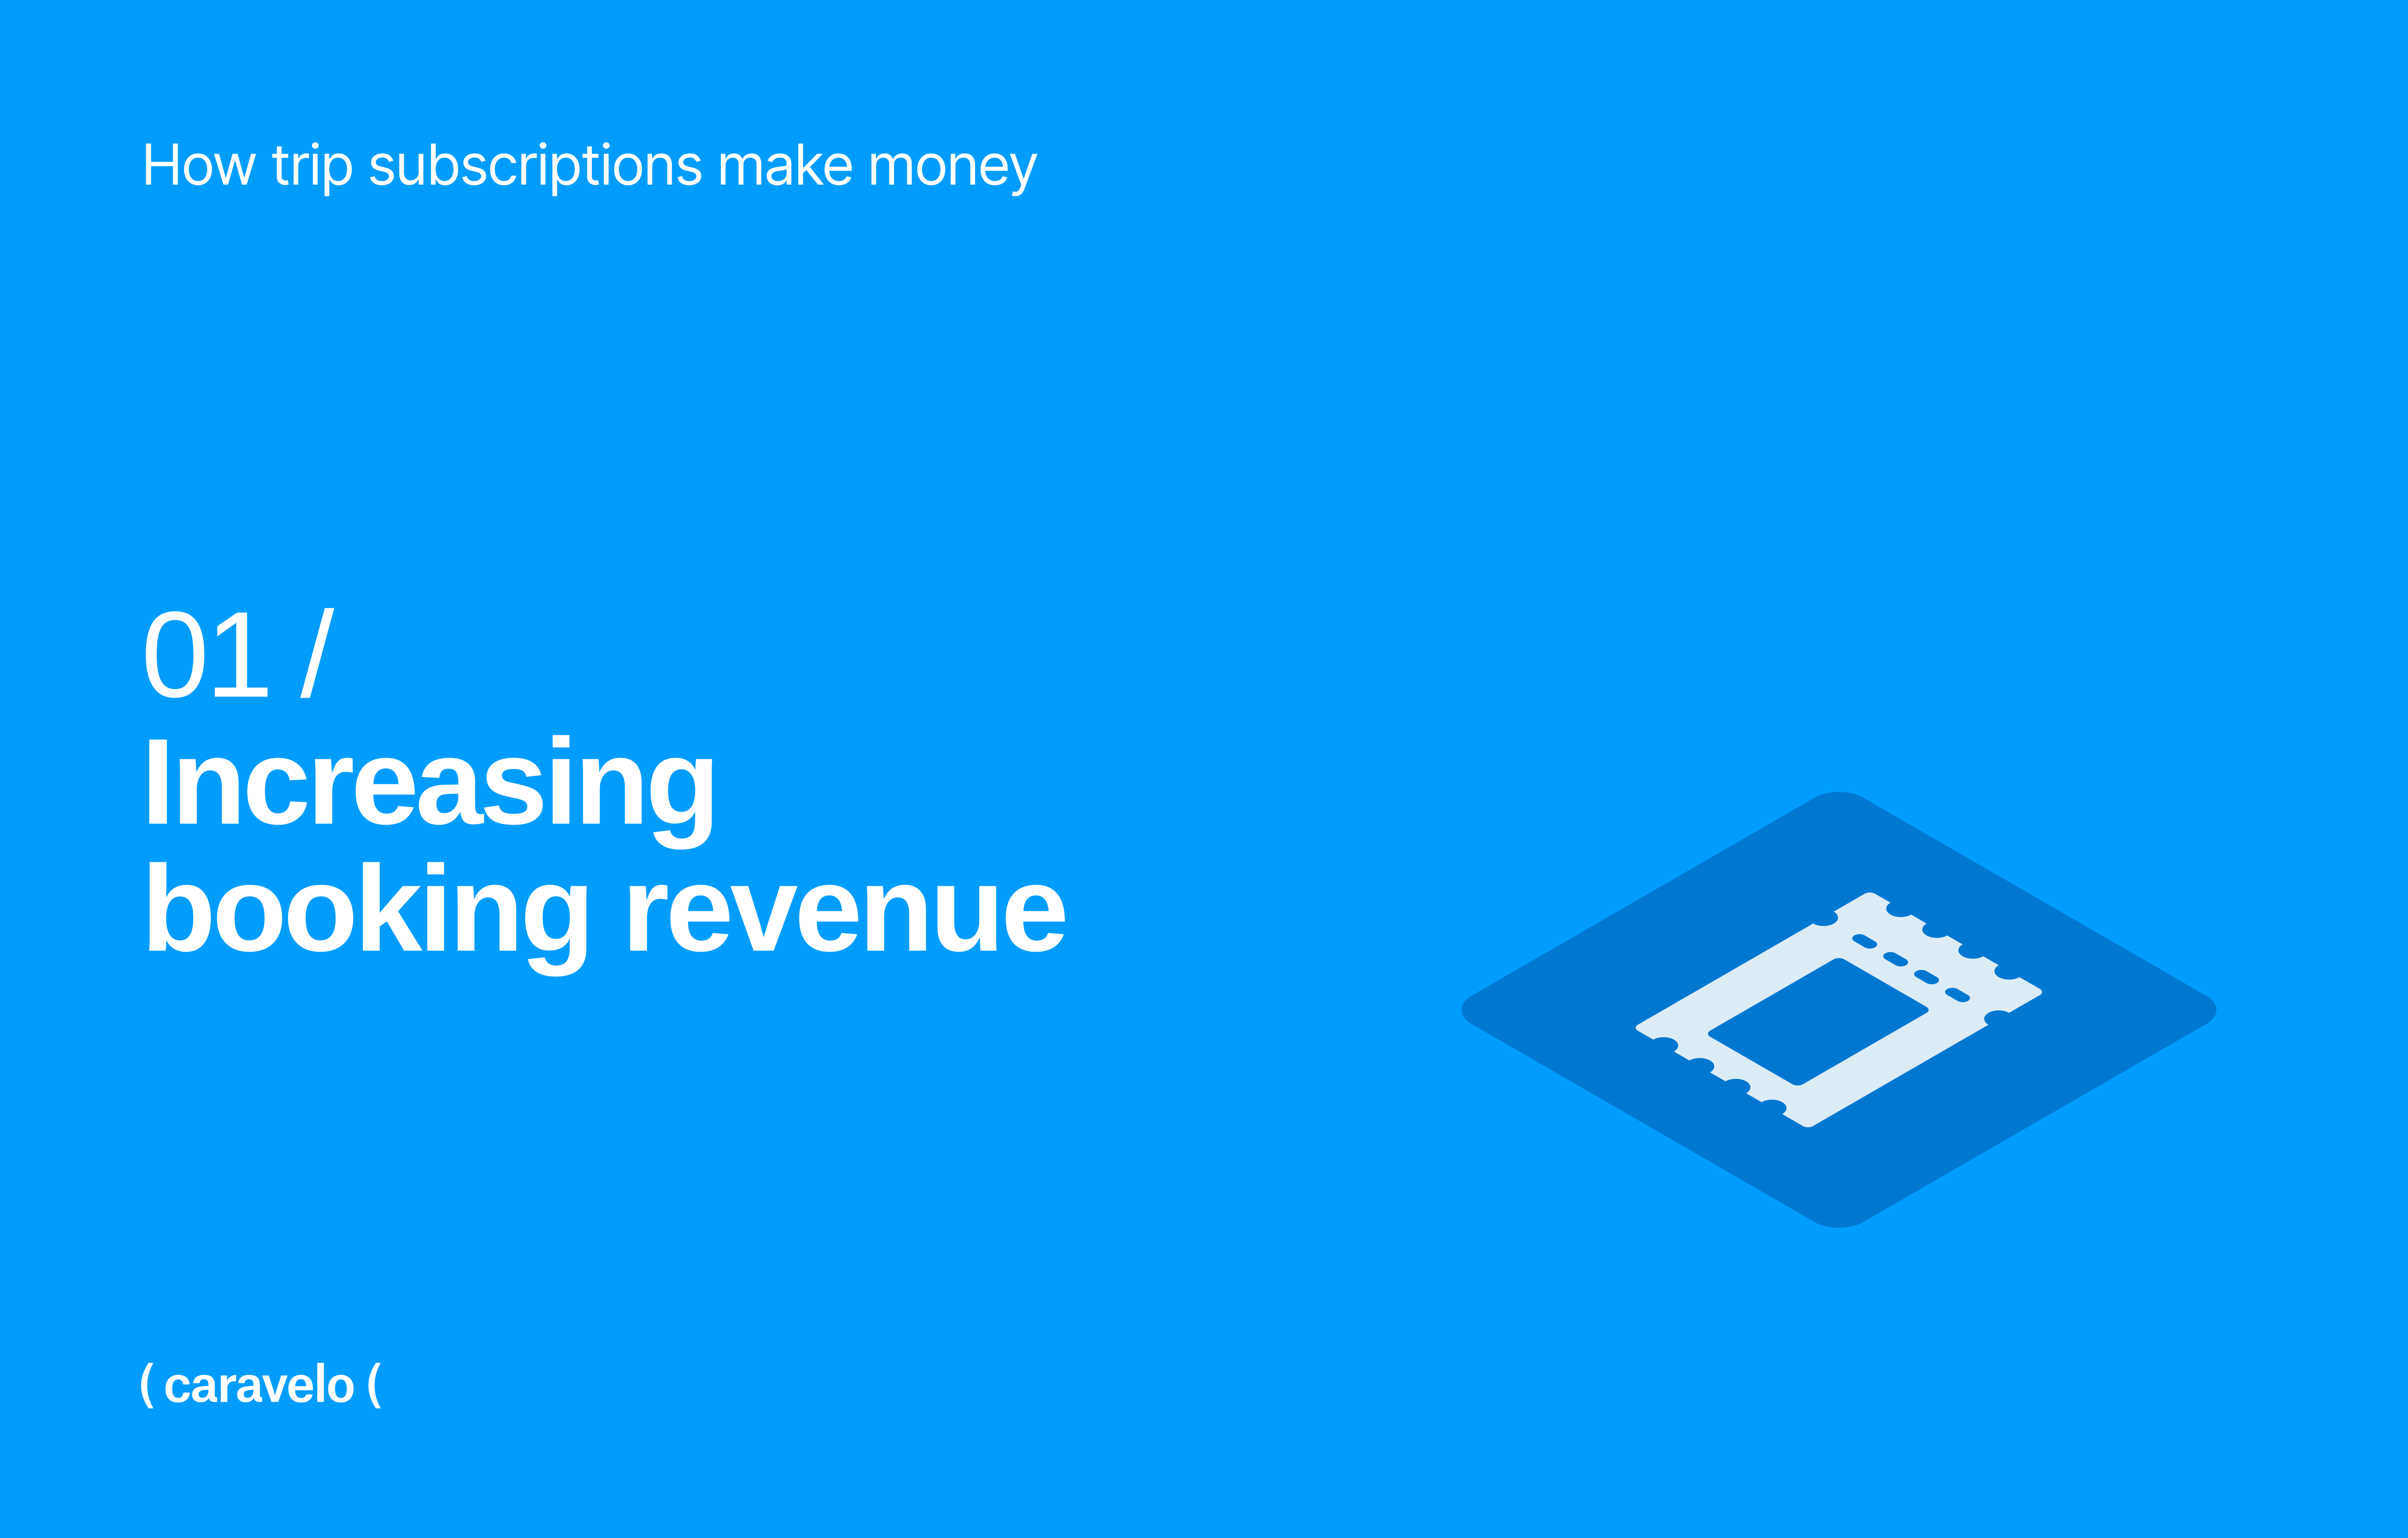 How Trip Subscriptions make money. Part 1: Increasing booking revenue